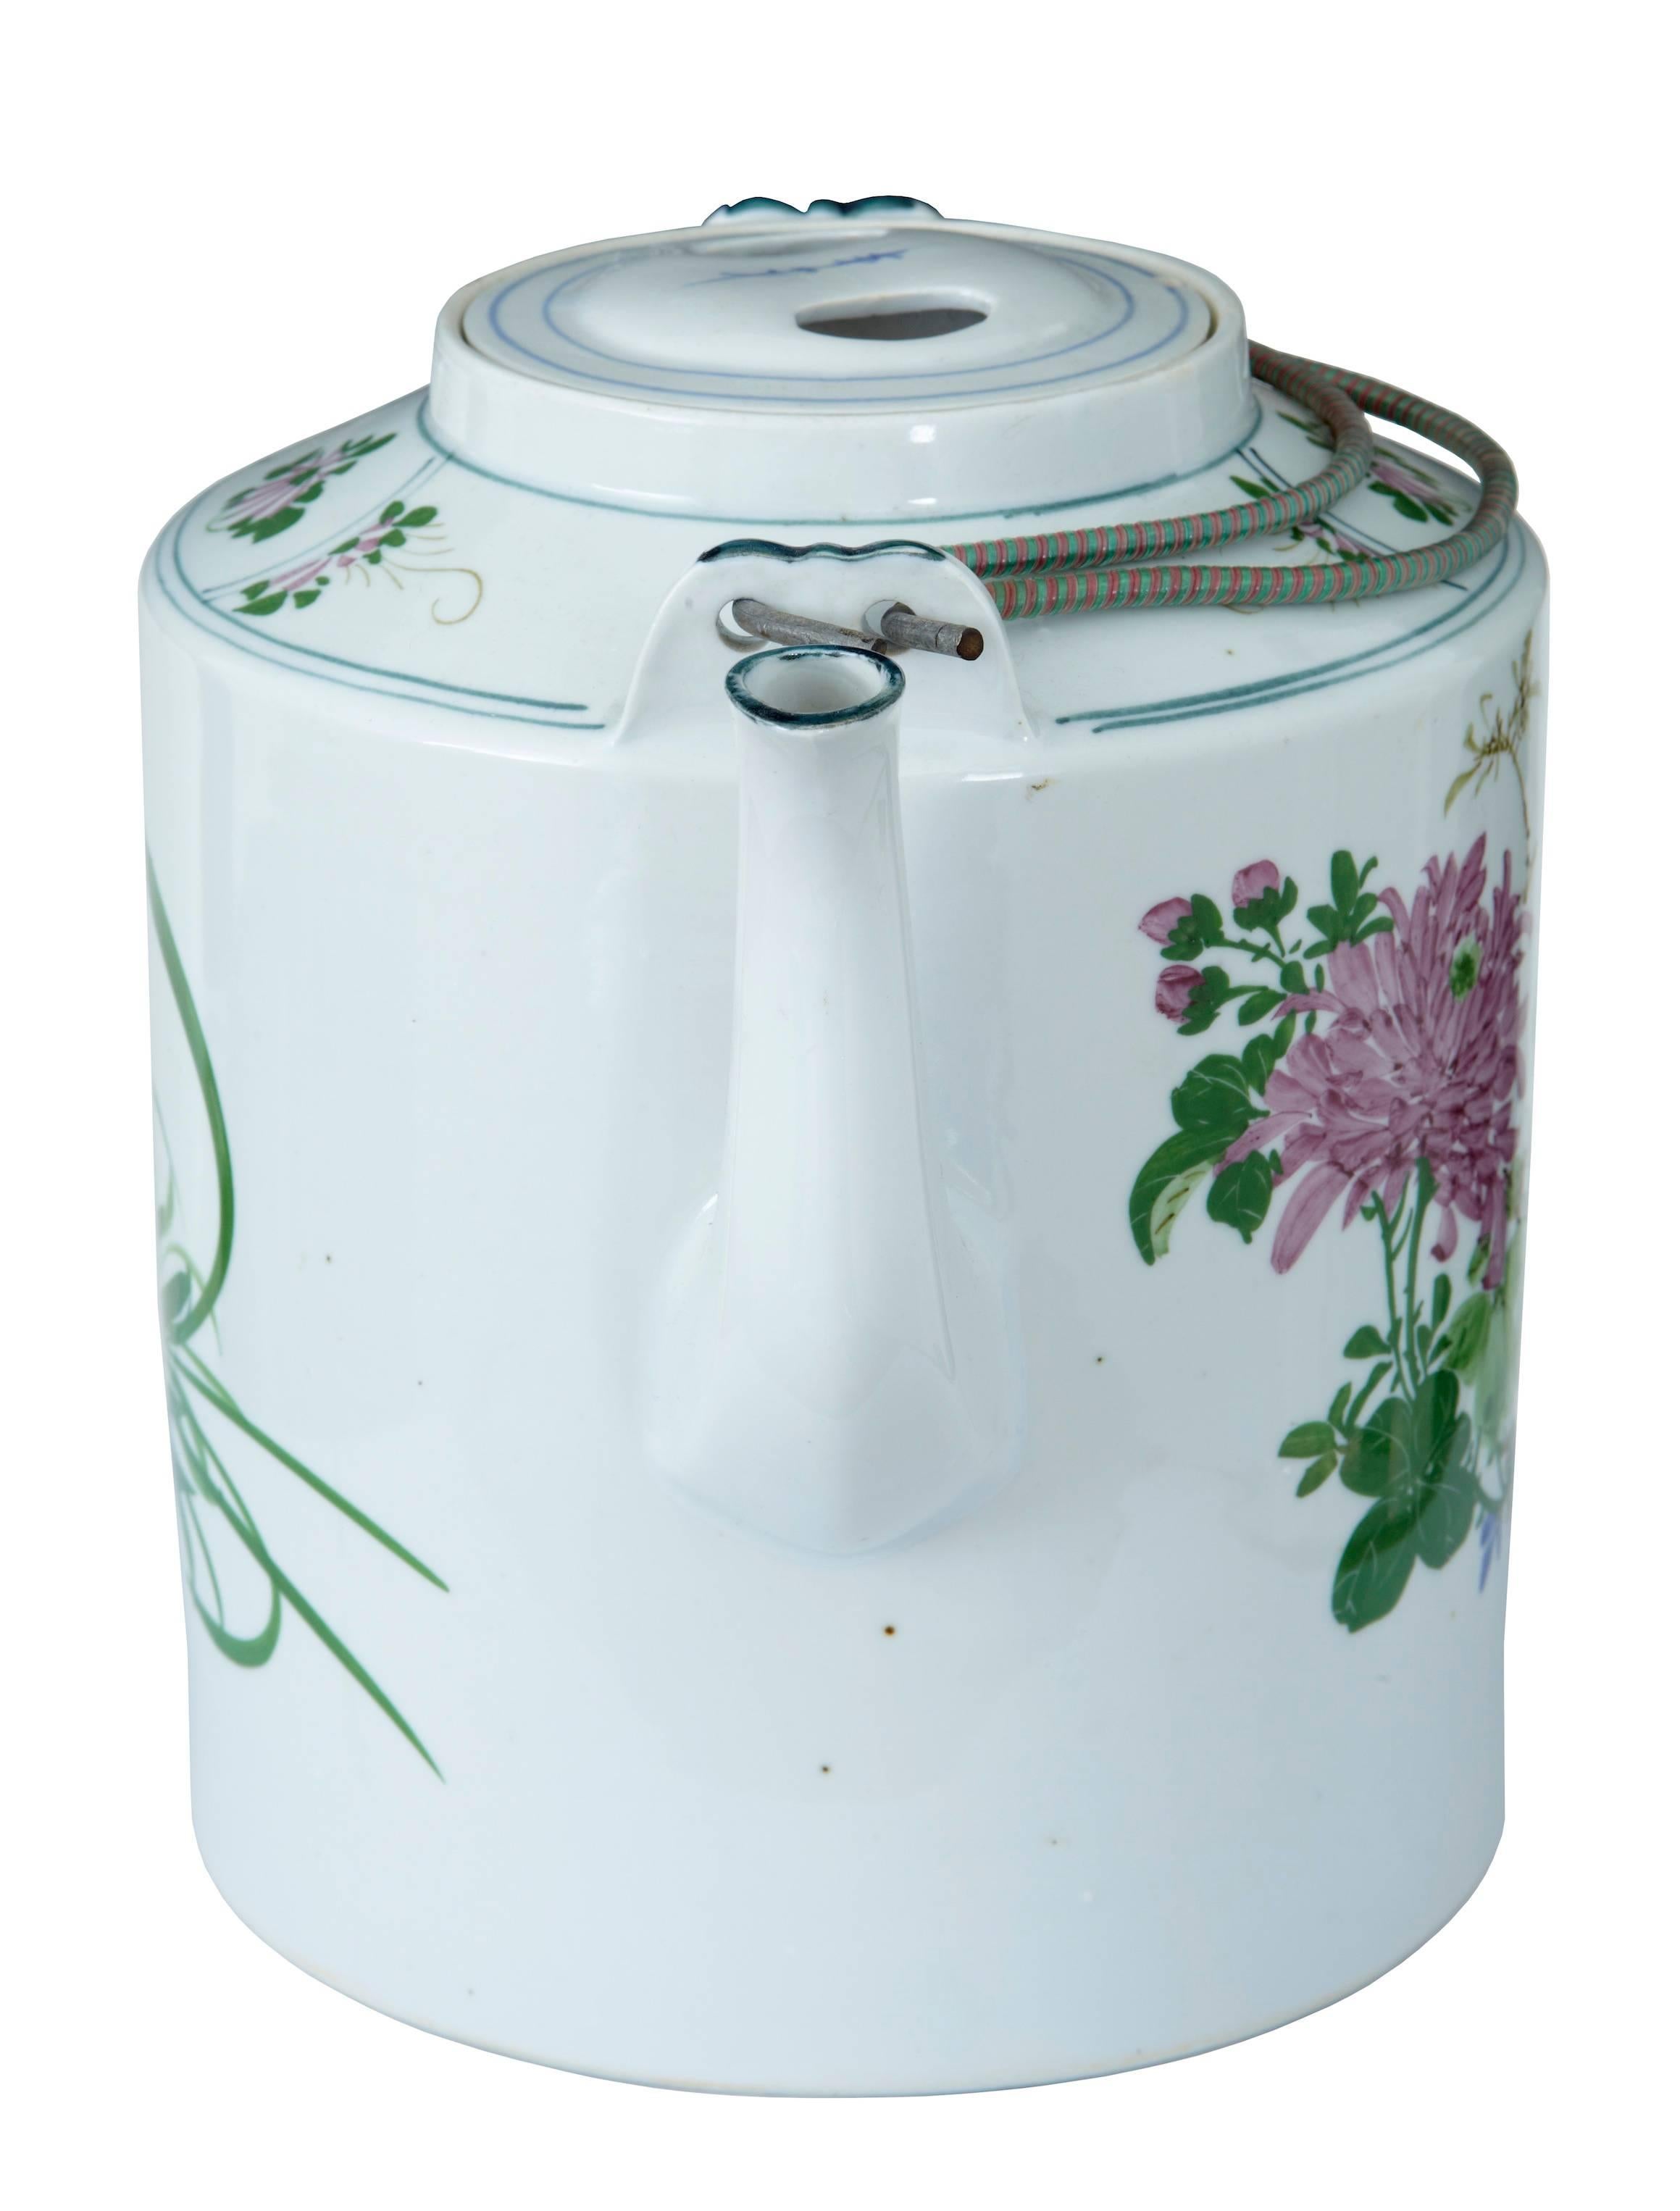 Hand-painted, depicting a bird flying among flowers. Small loss to inside edge of lid.

Measures: Height 9 1/4